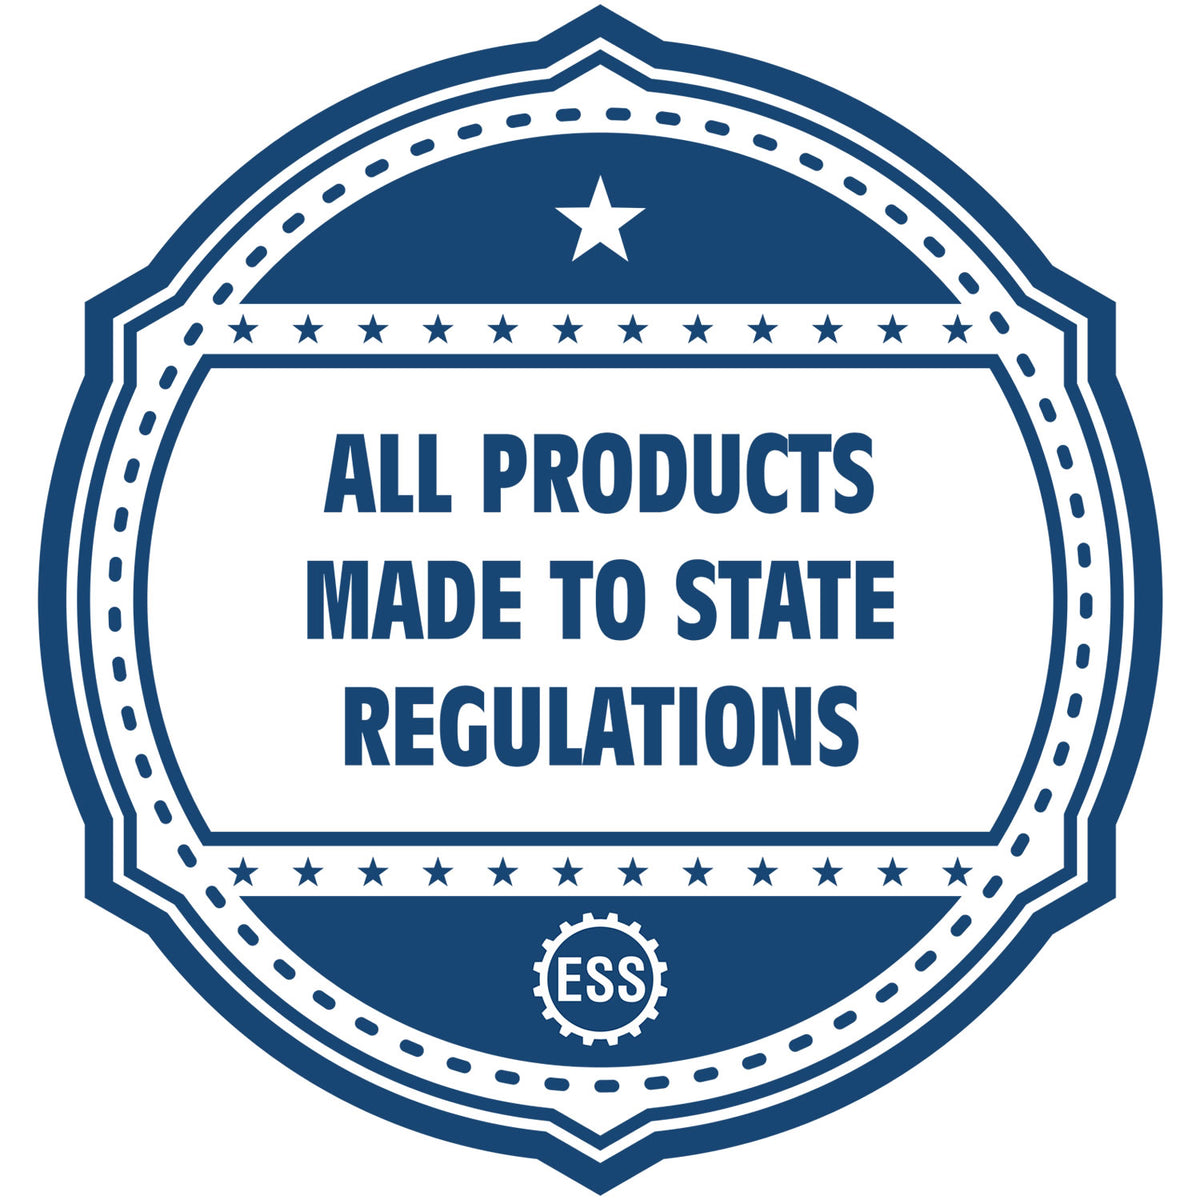 An icon or badge element for the Iowa Professional Engineer Seal Stamp showing that this product is made in compliance with state regulations.